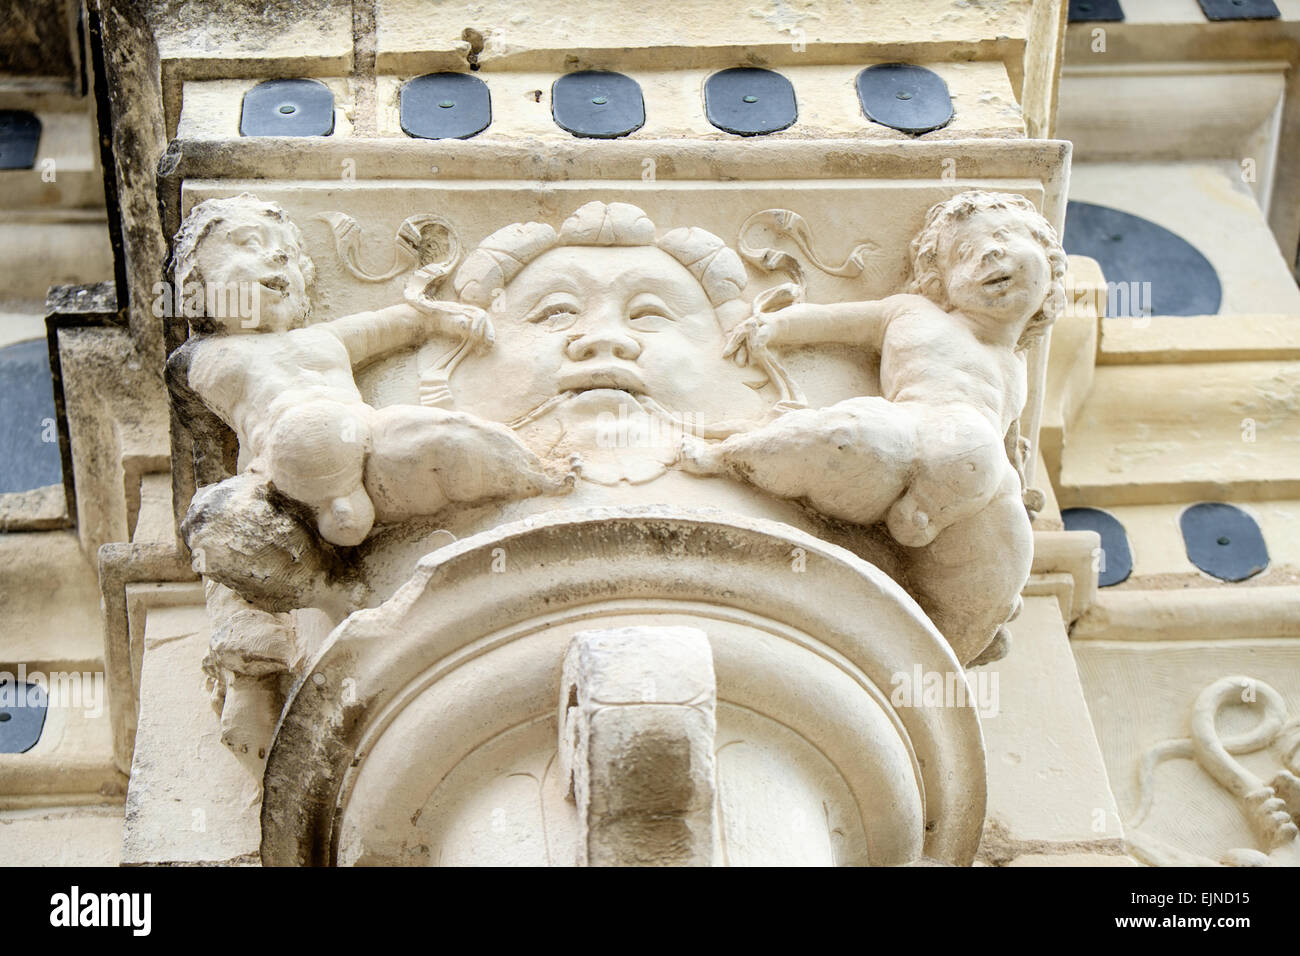 Architectural detail of Chateau de Chambord, Loire Valley, France Stock Photo